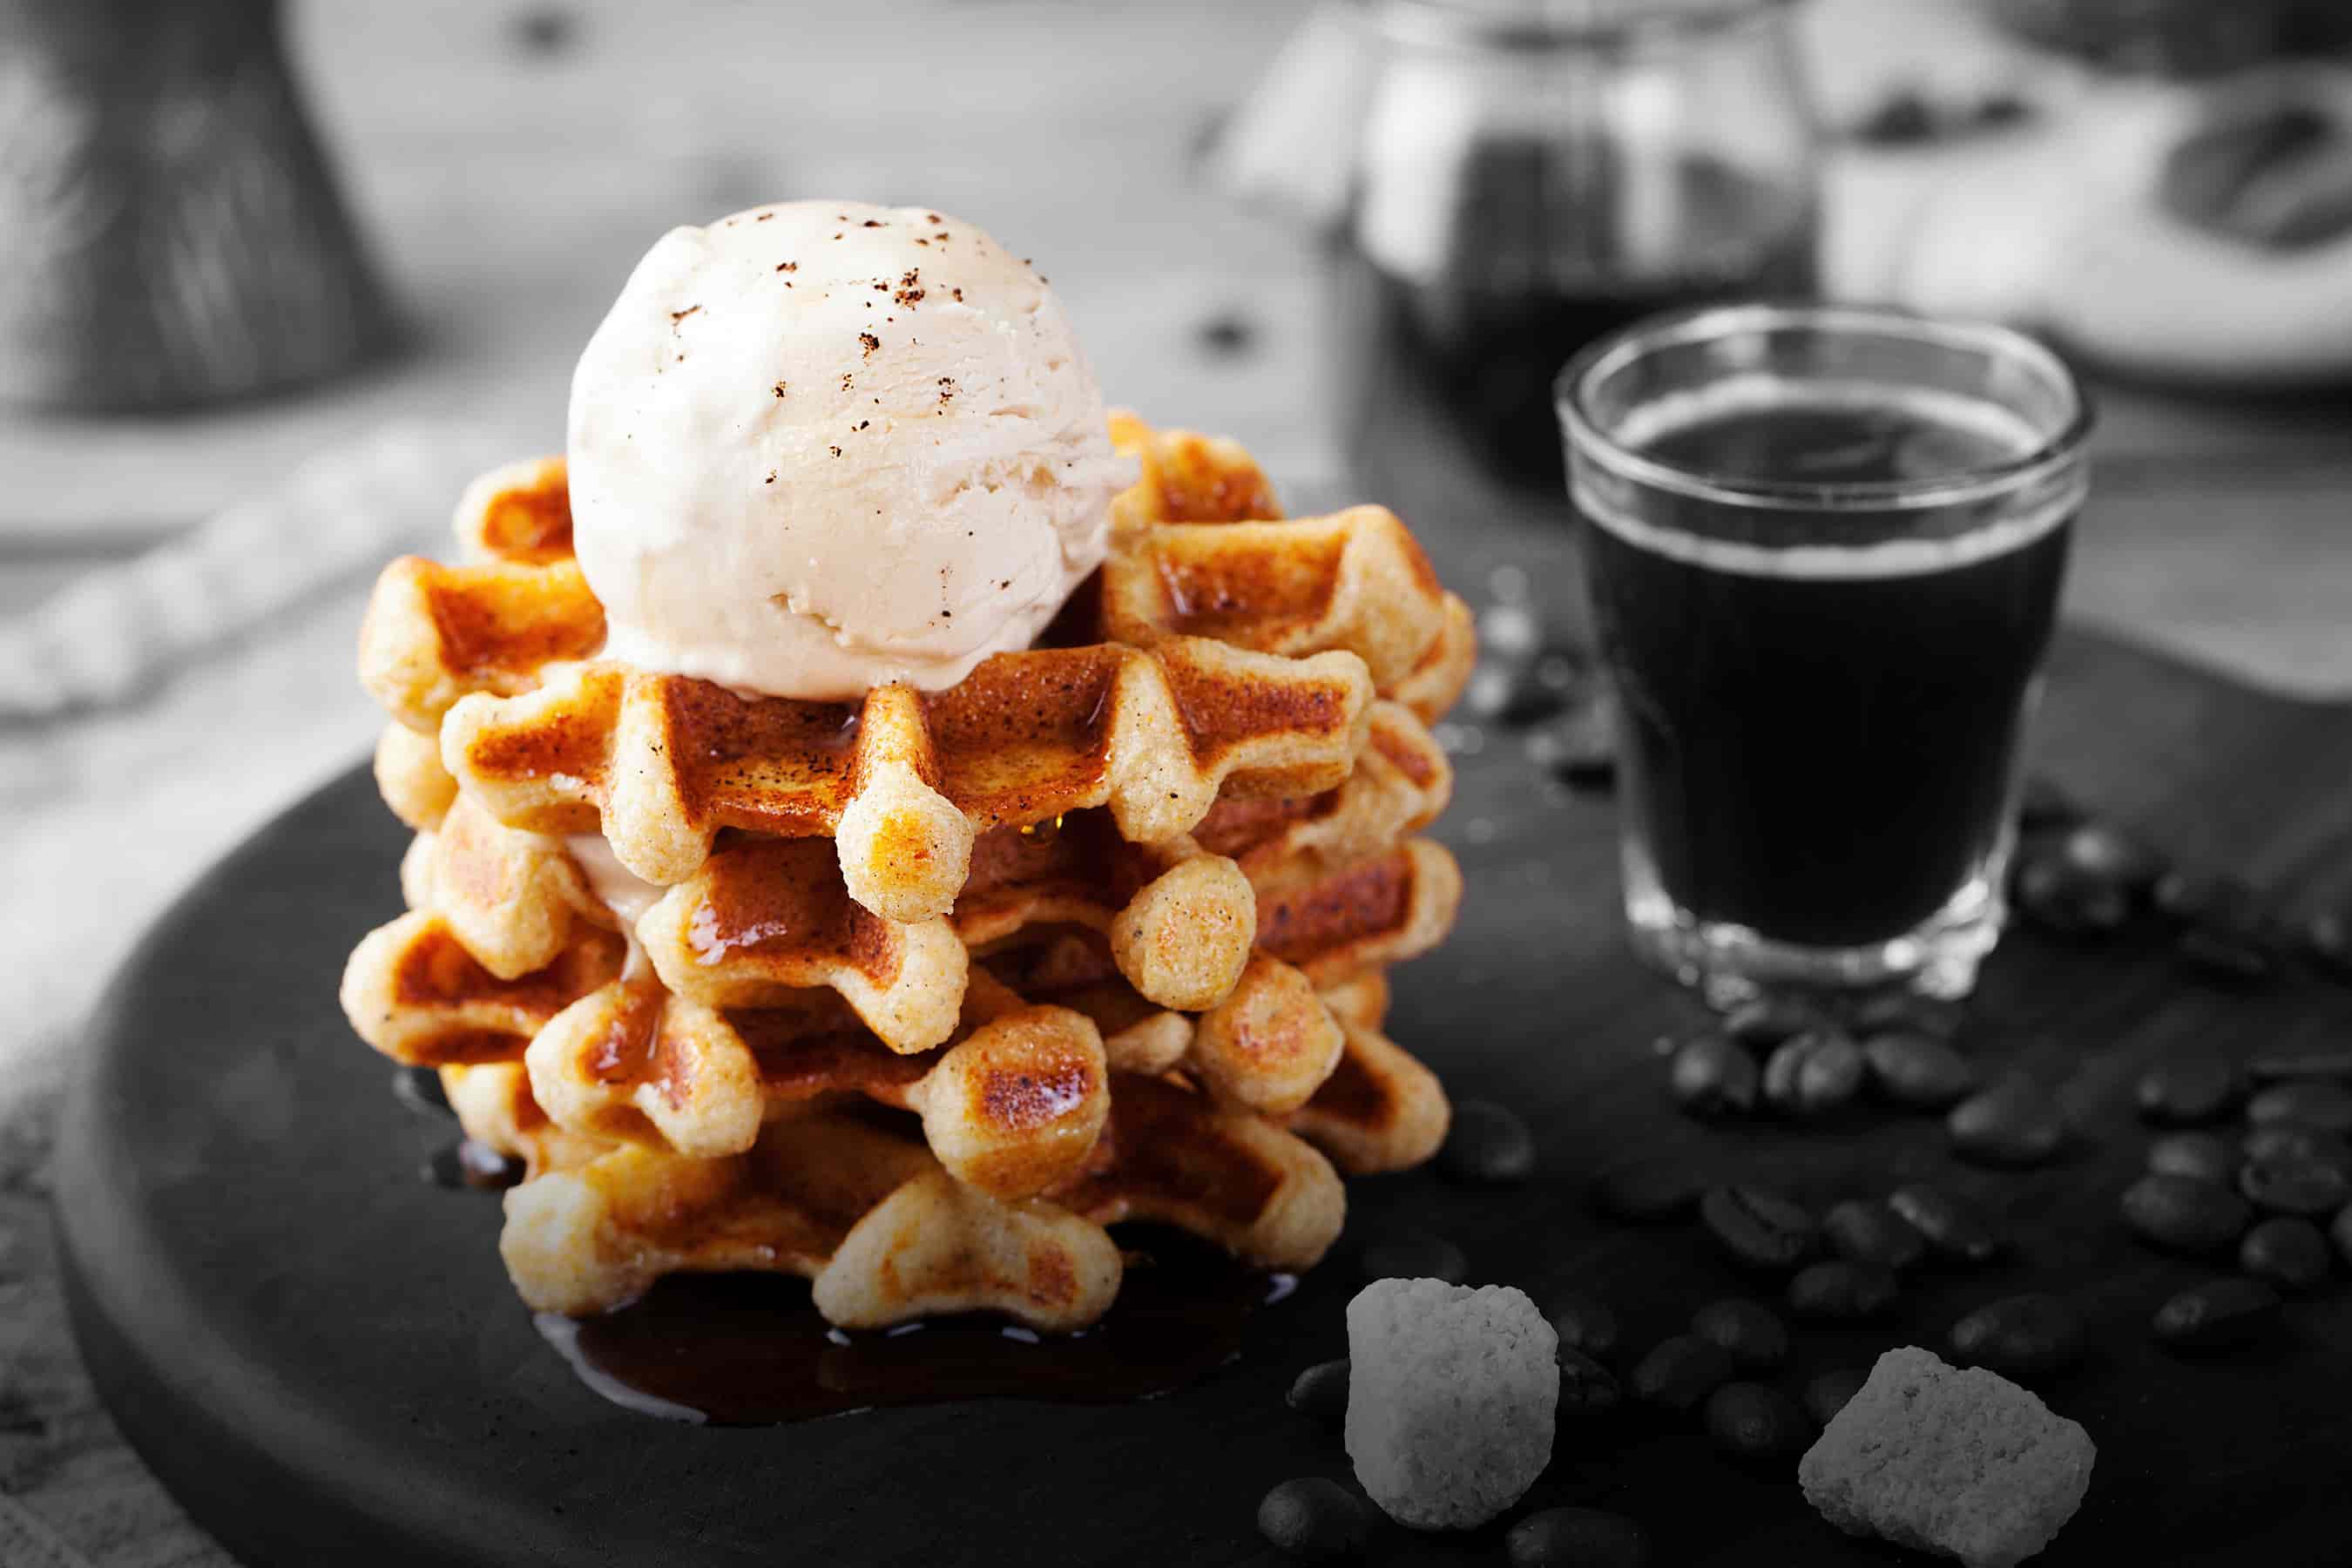 A stack of healthier ingredient waffles with a scoop of ice cream on top. A glass of espresso is displayed in the background.